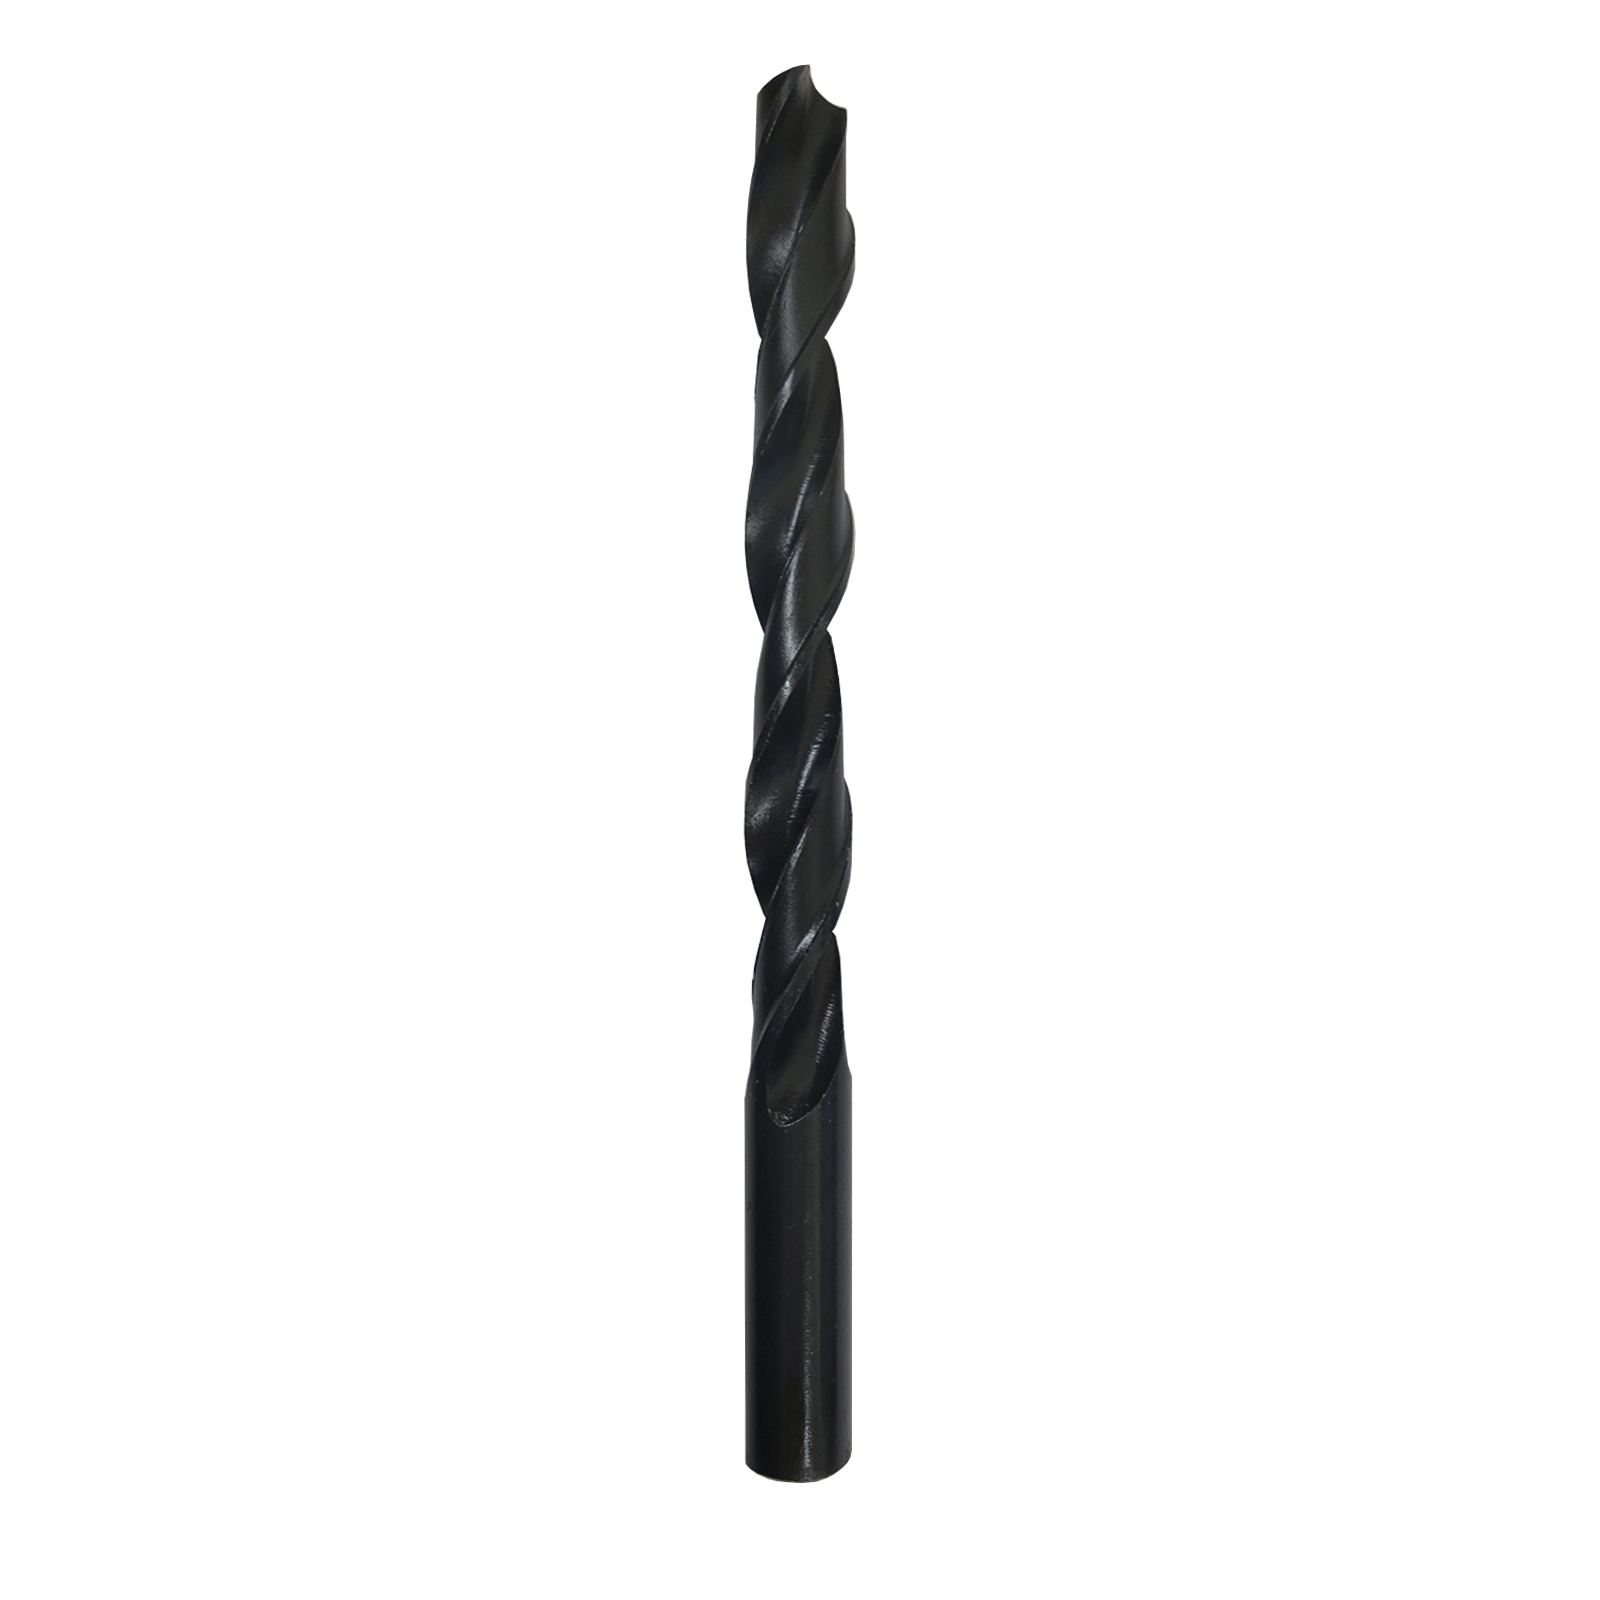 Gyros 45-42055 Premium (Made in US) Industrial Grade HSS Black Oxide Metric Drill Bit, 3.7 mm, Pack of 12